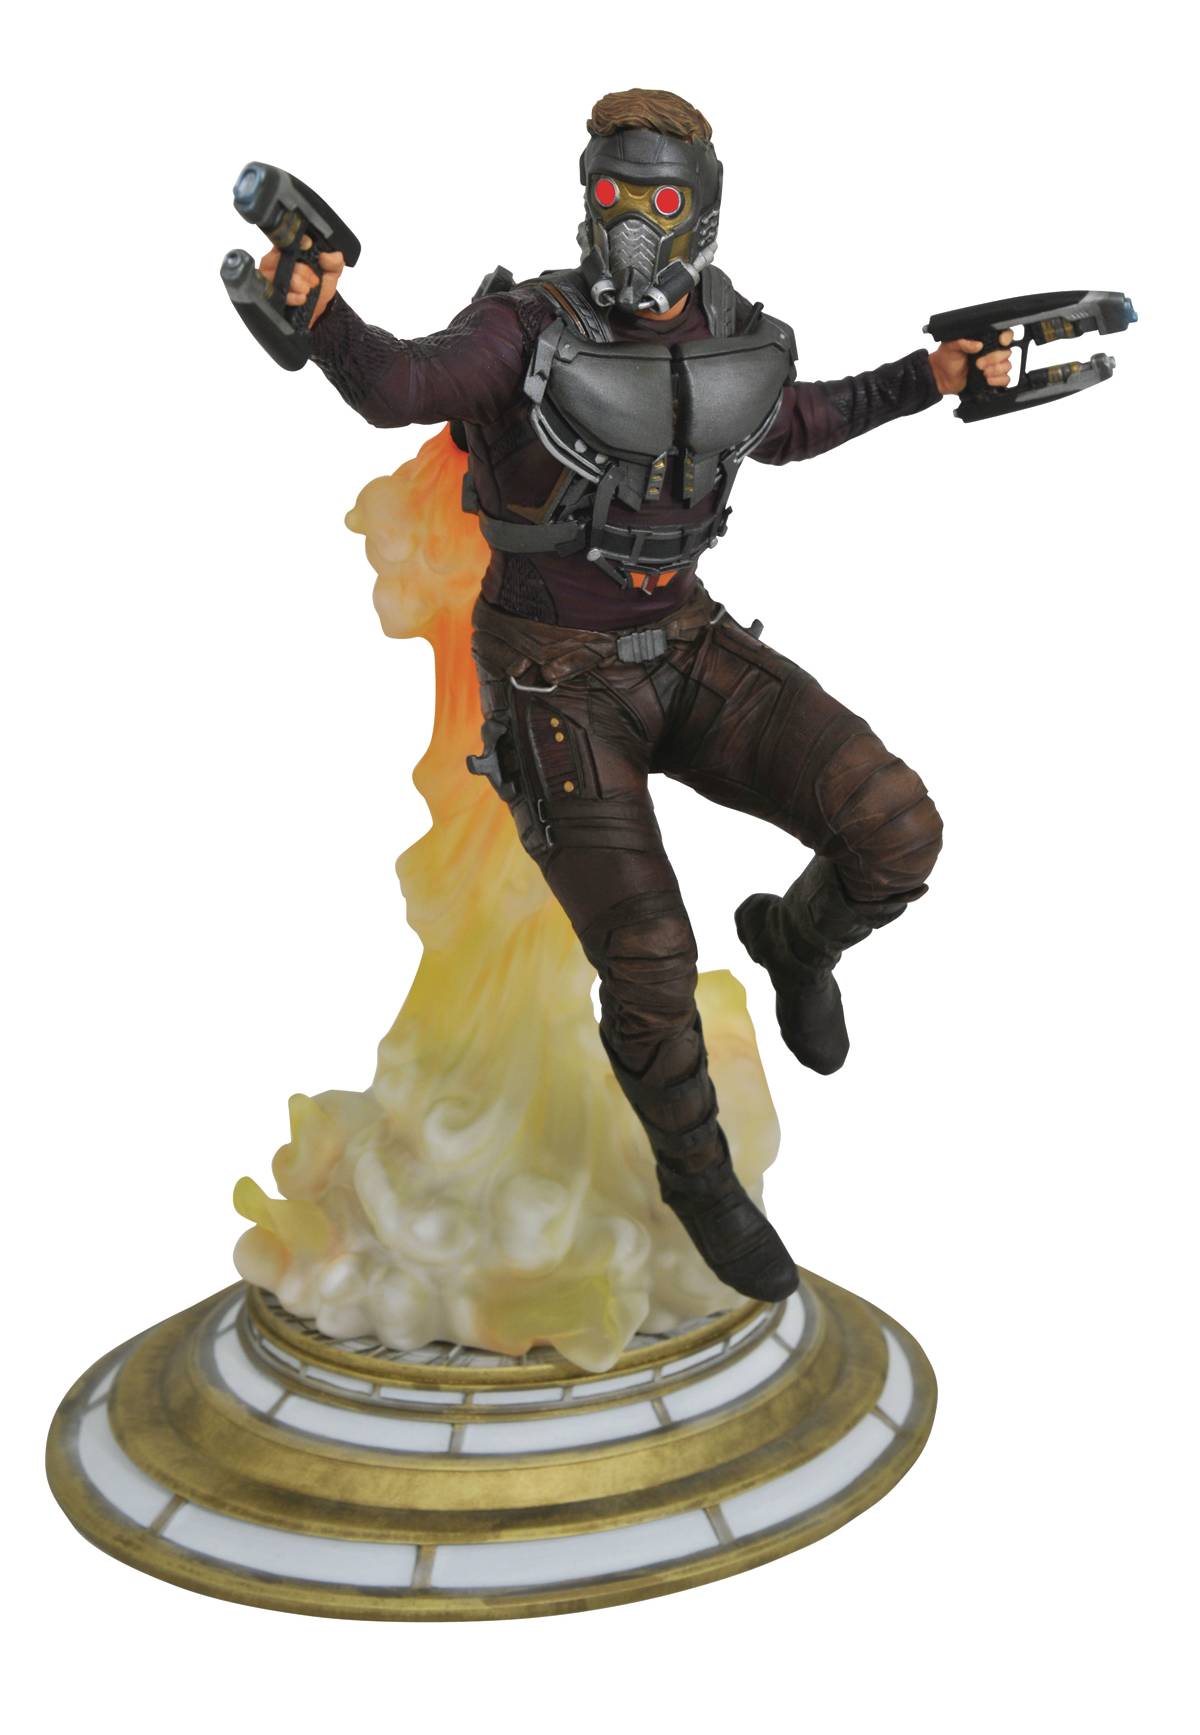 Marvel Gallery Guardians of the Galaxy 2 Star-Lord PVC Figure